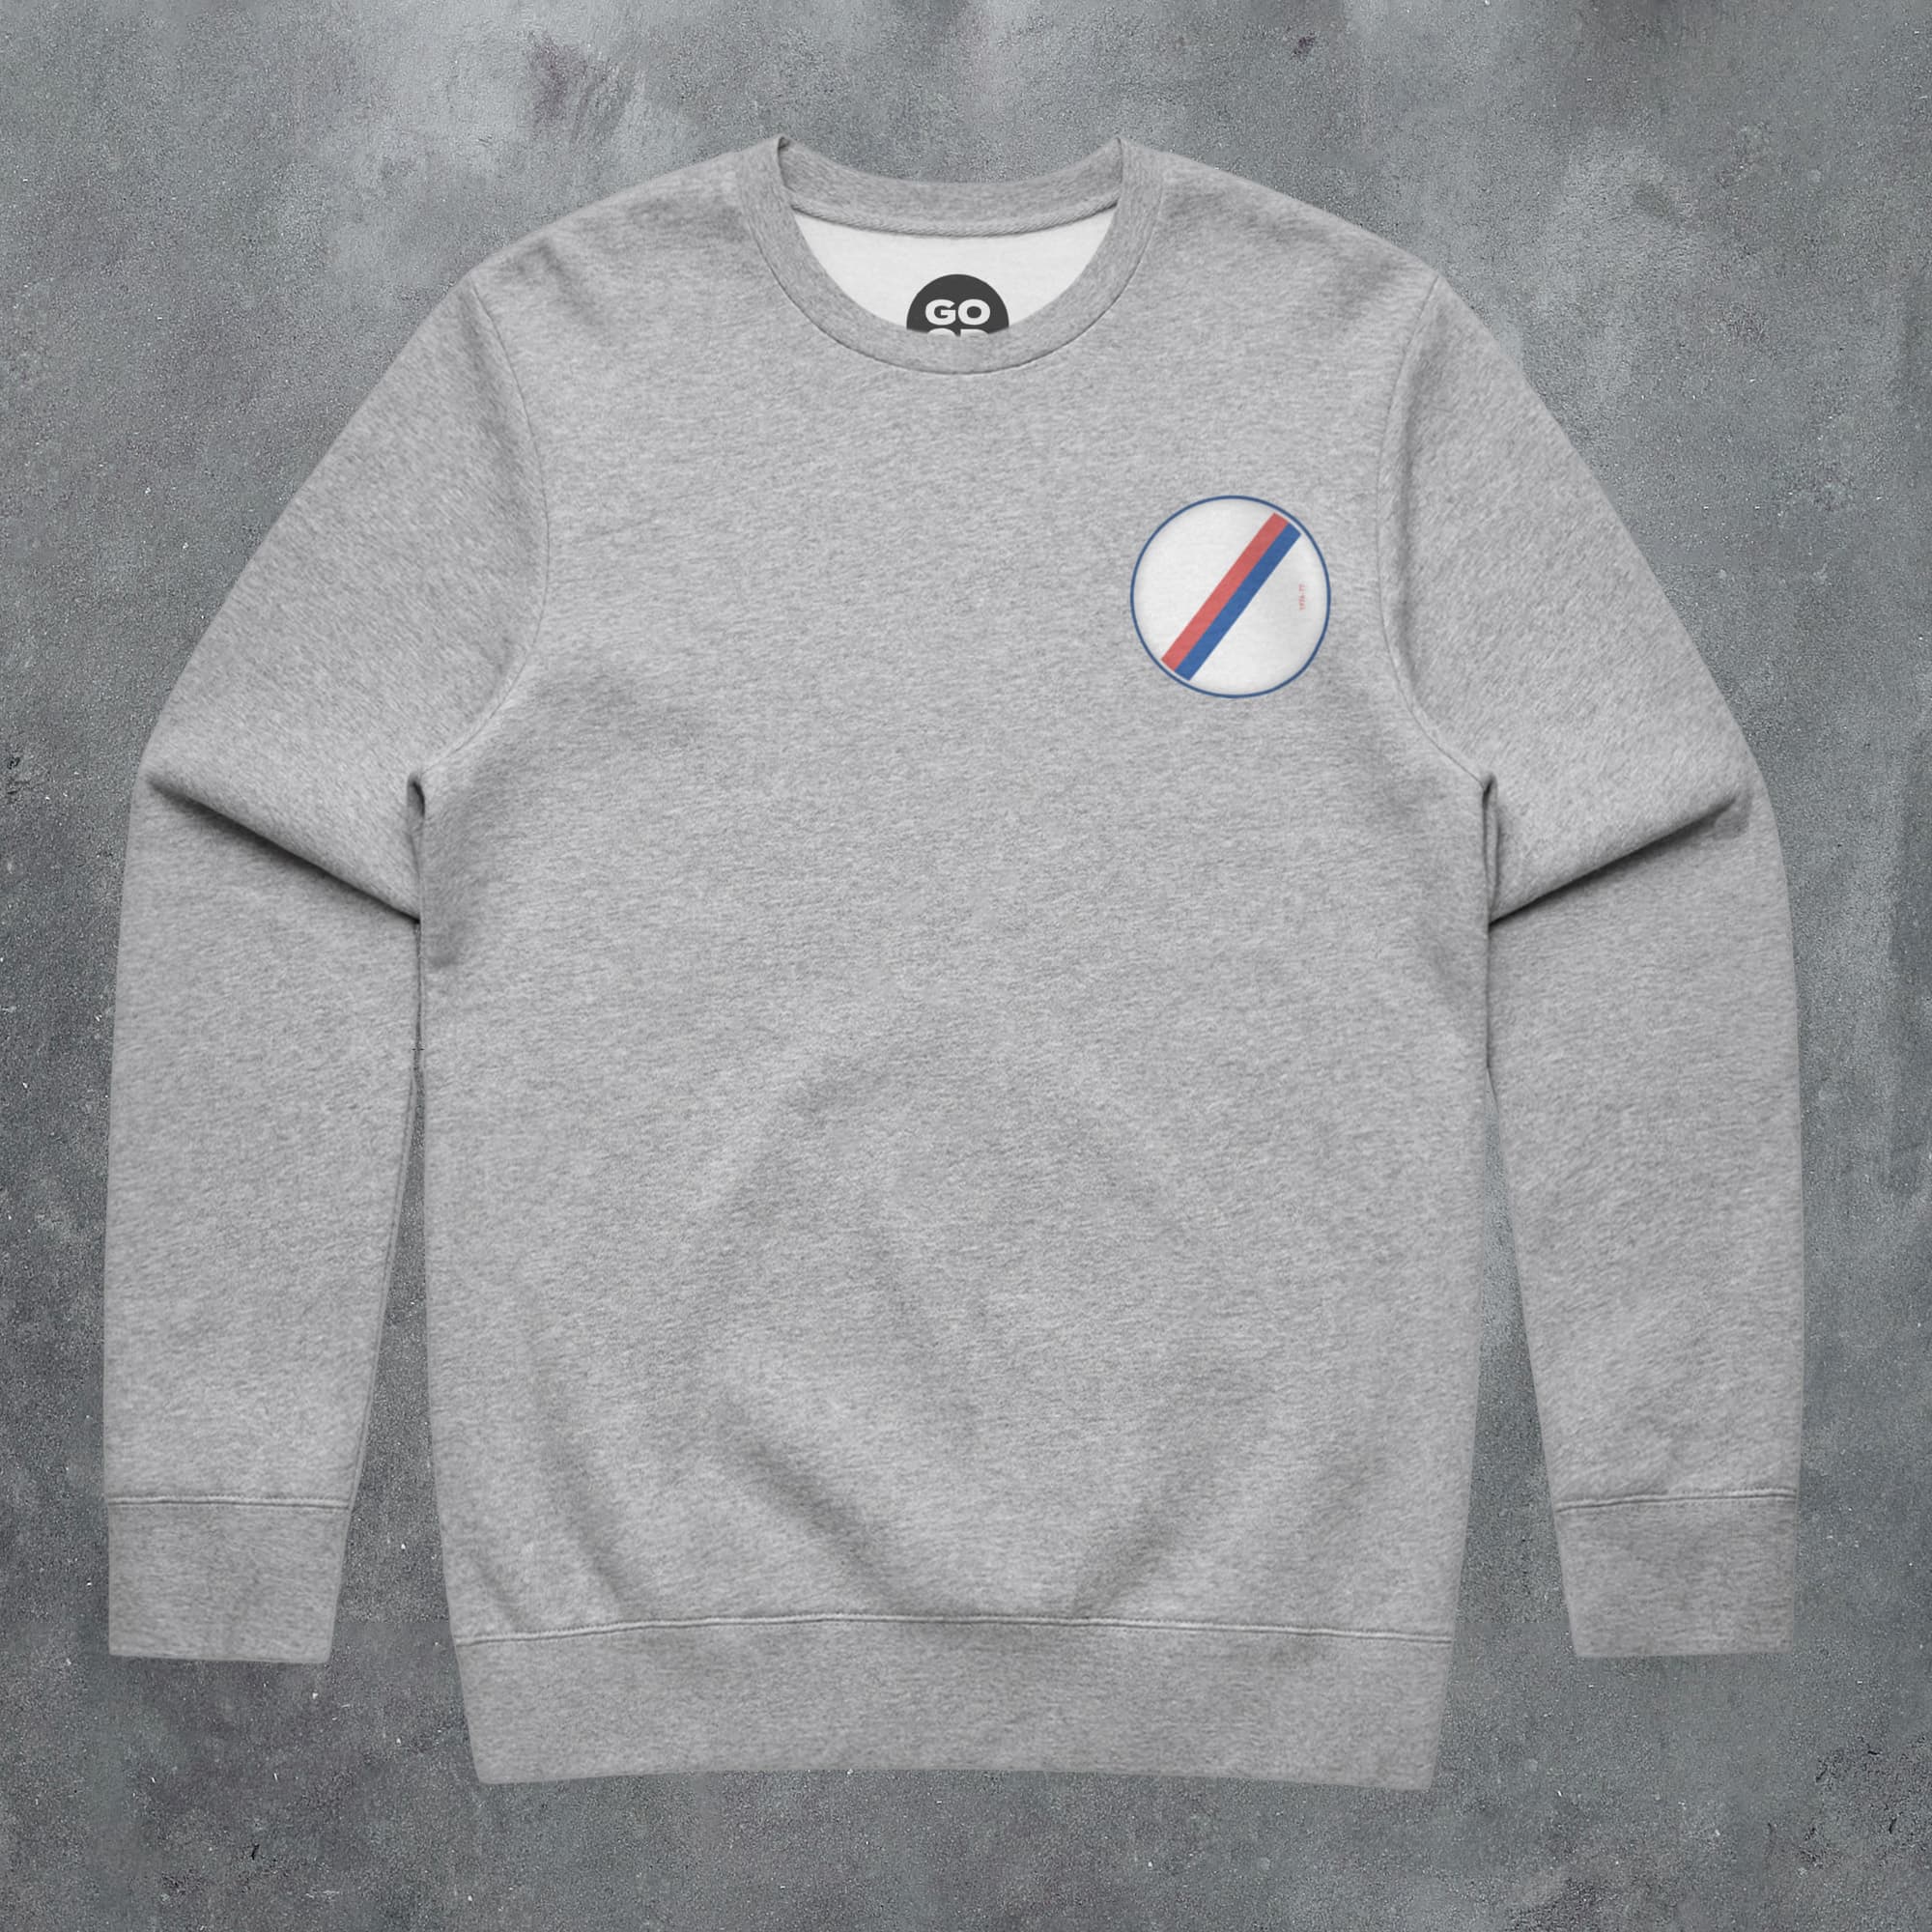 a grey sweatshirt with a white, blue, and red stripe on the chest